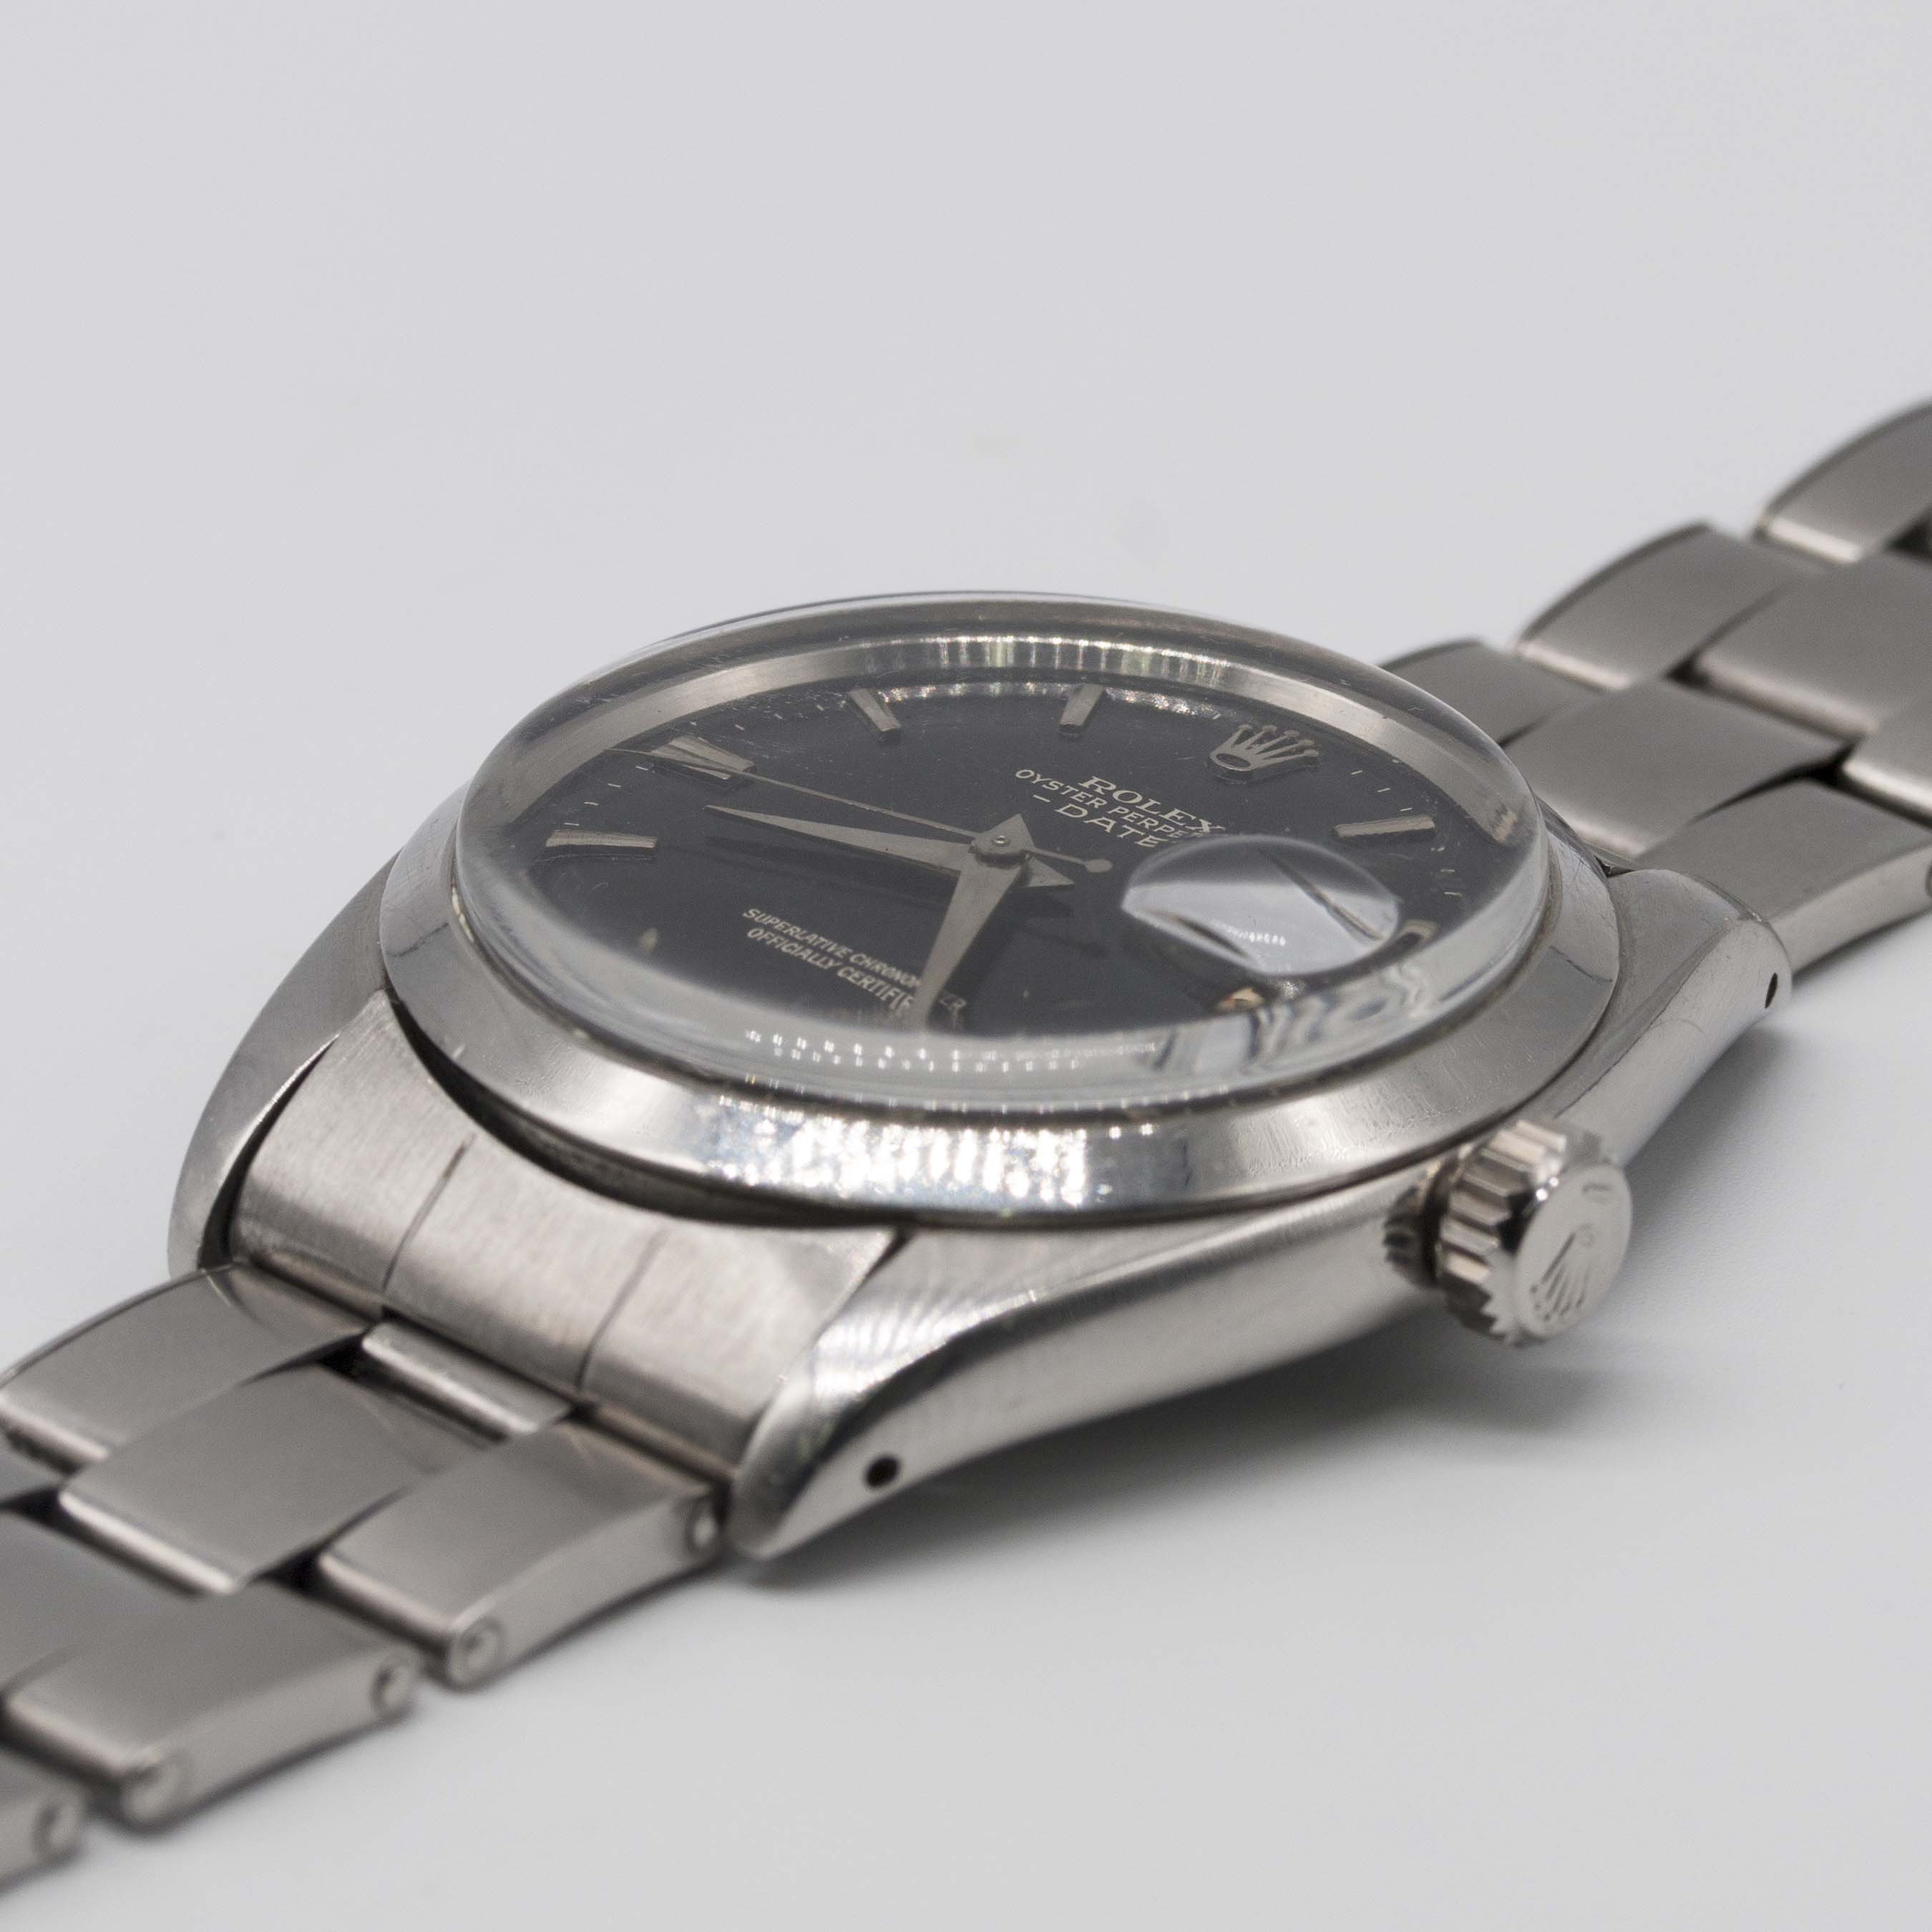 A GENTLEMAN'S STAINLESS STEEL ROLEX OYSTER PERPETUAL DATE BRACELET WATCH CIRCA 1961, REF. 1500 GLOSS - Image 3 of 12